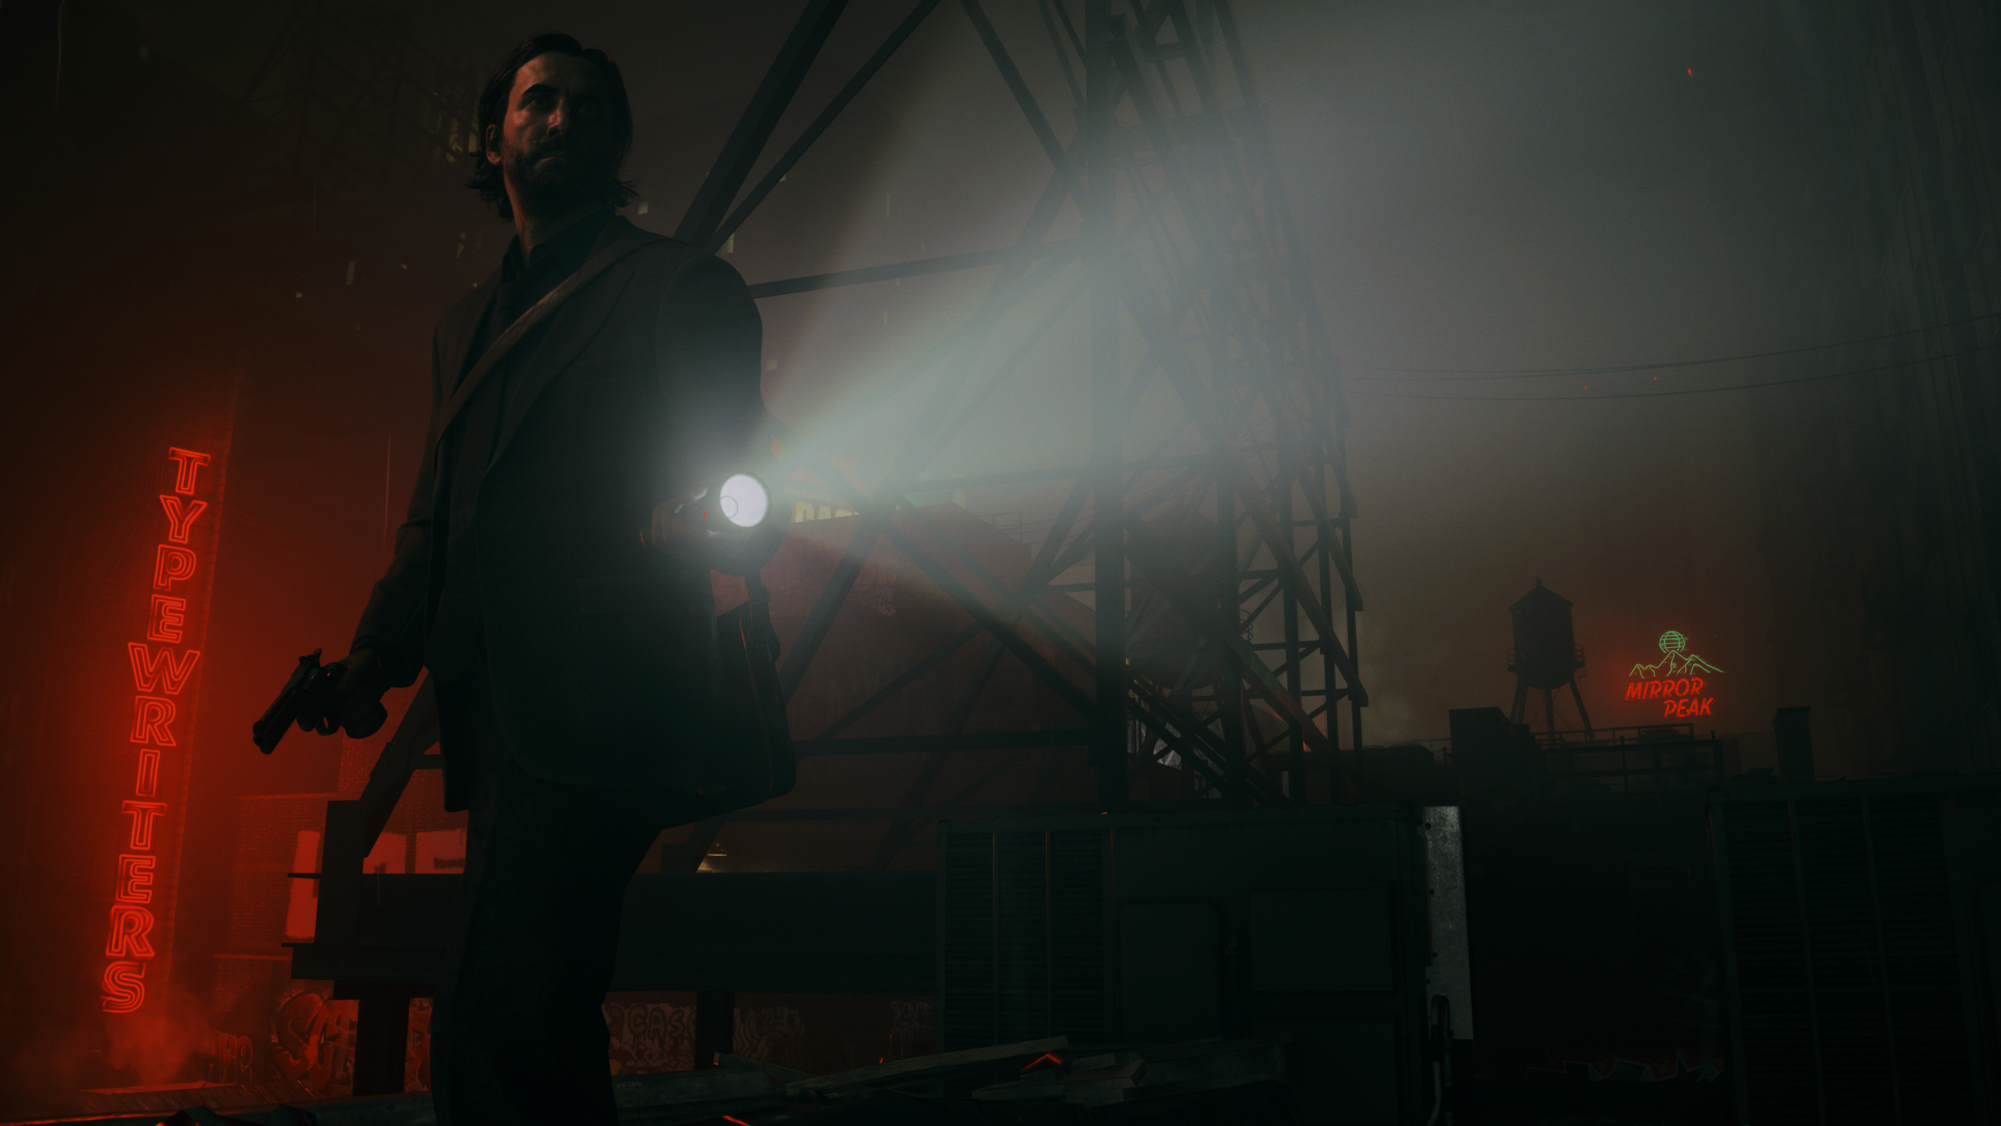 Alan Wake 2 Introduces Its New Co-Protagonist Saga Anderson in Latest Video